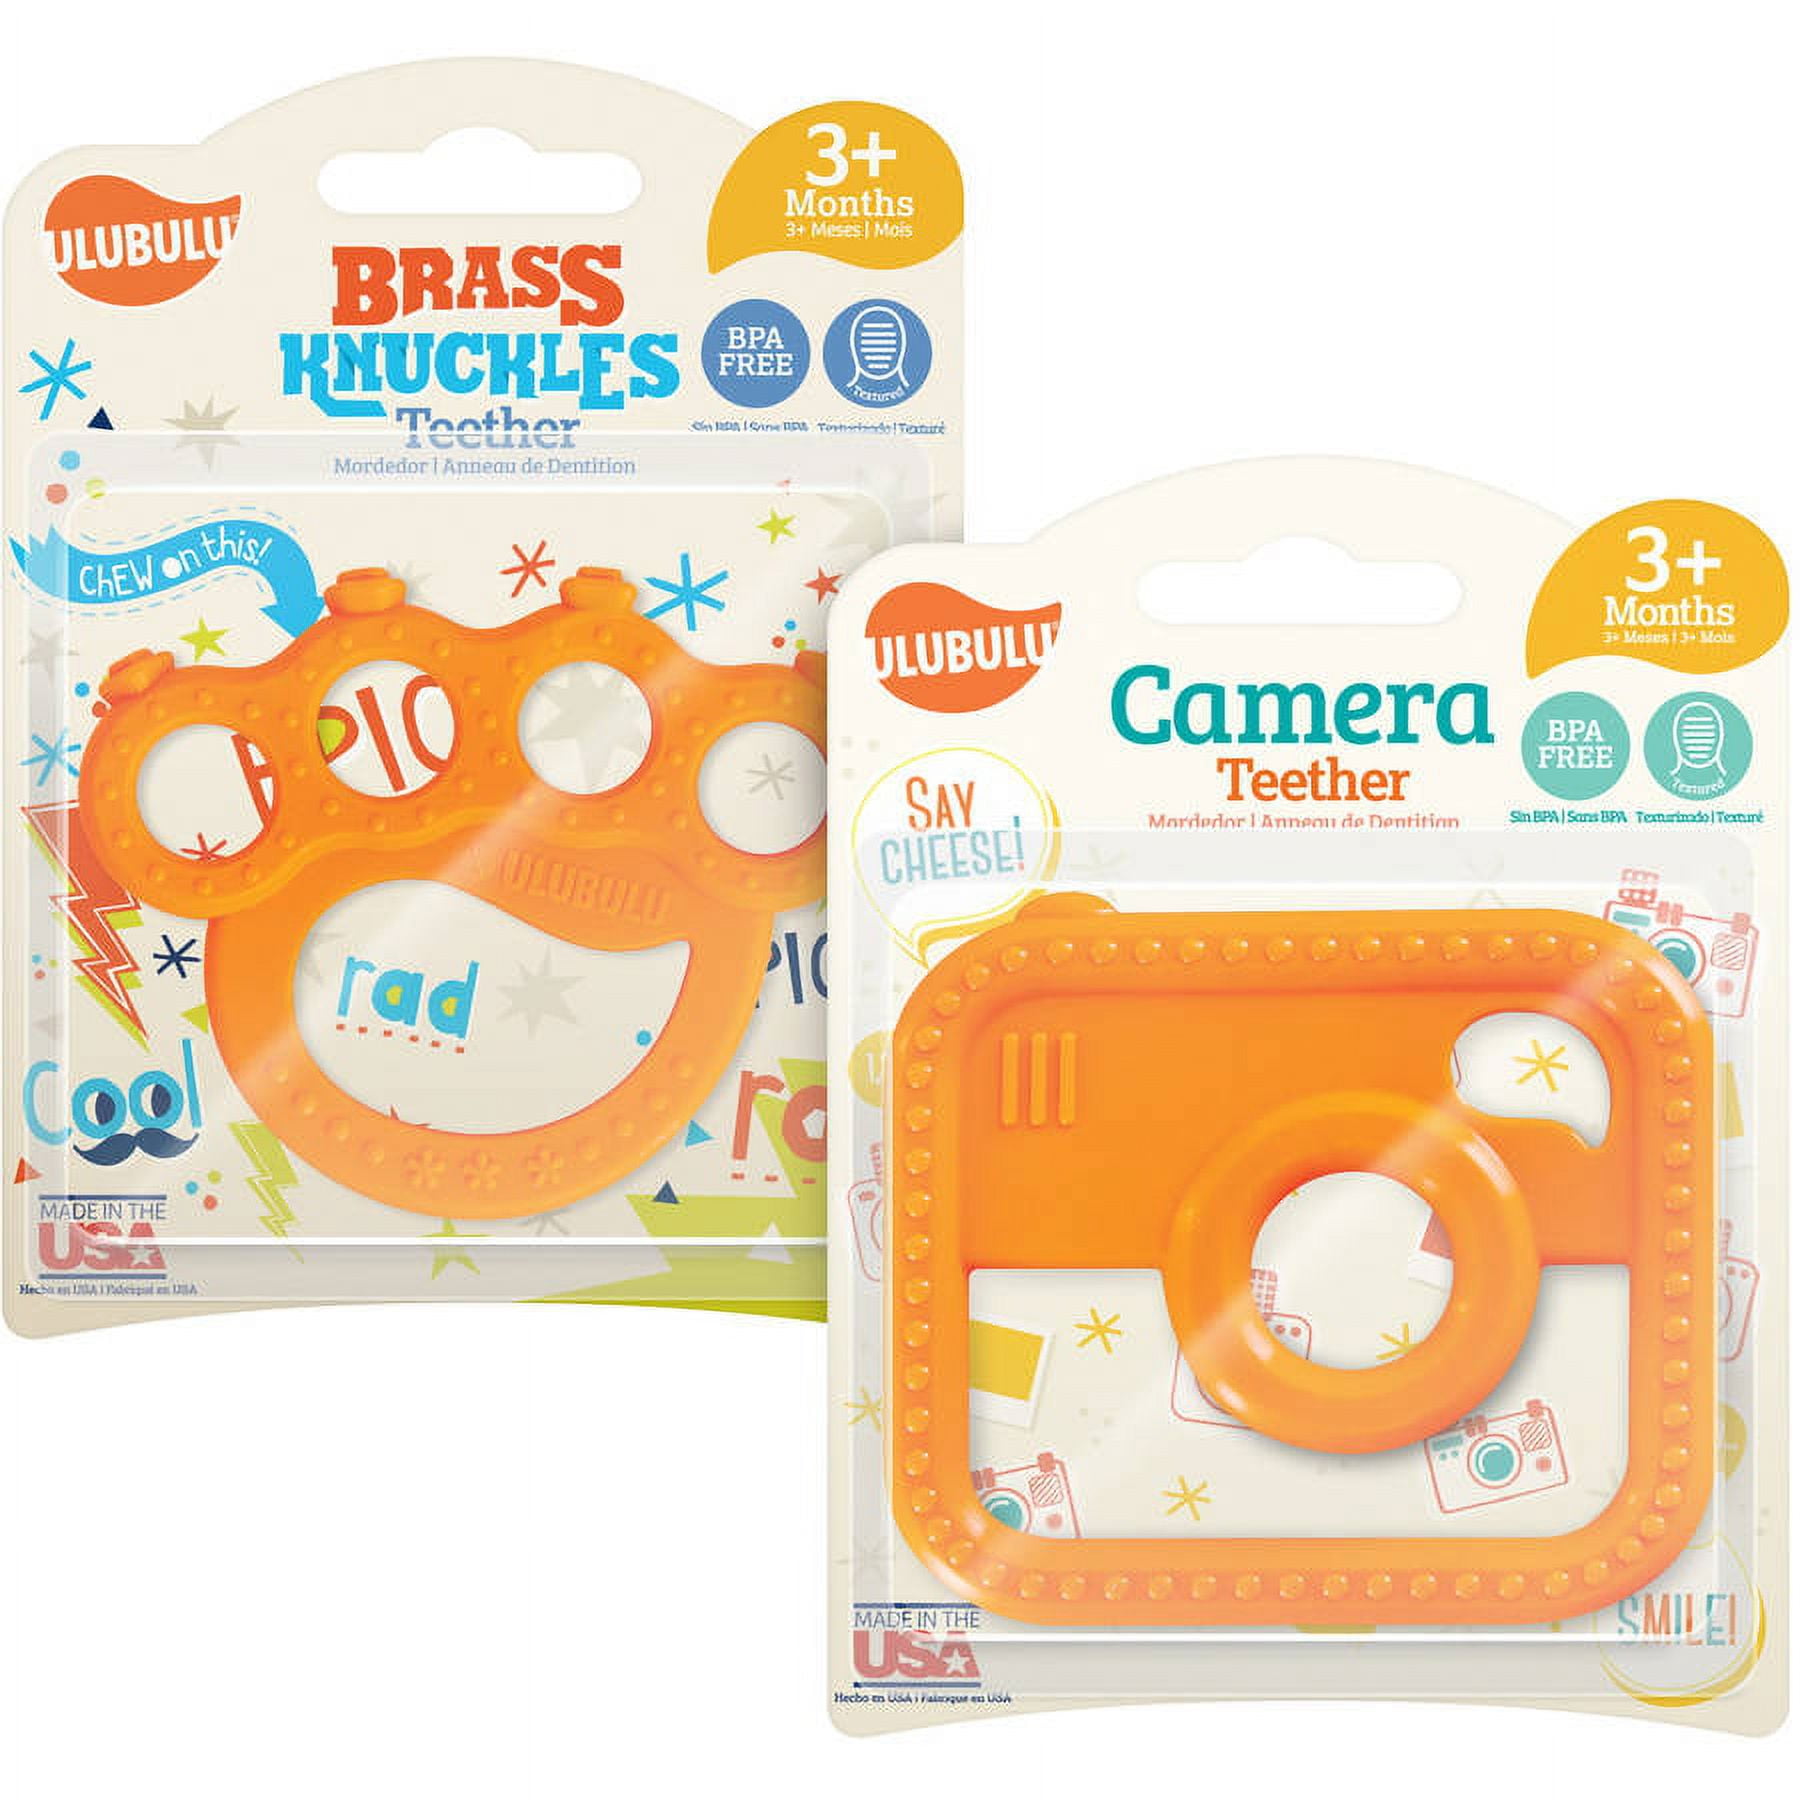 Ulubulu Expression Brass Knuckles Teether and Camera Teether Combo